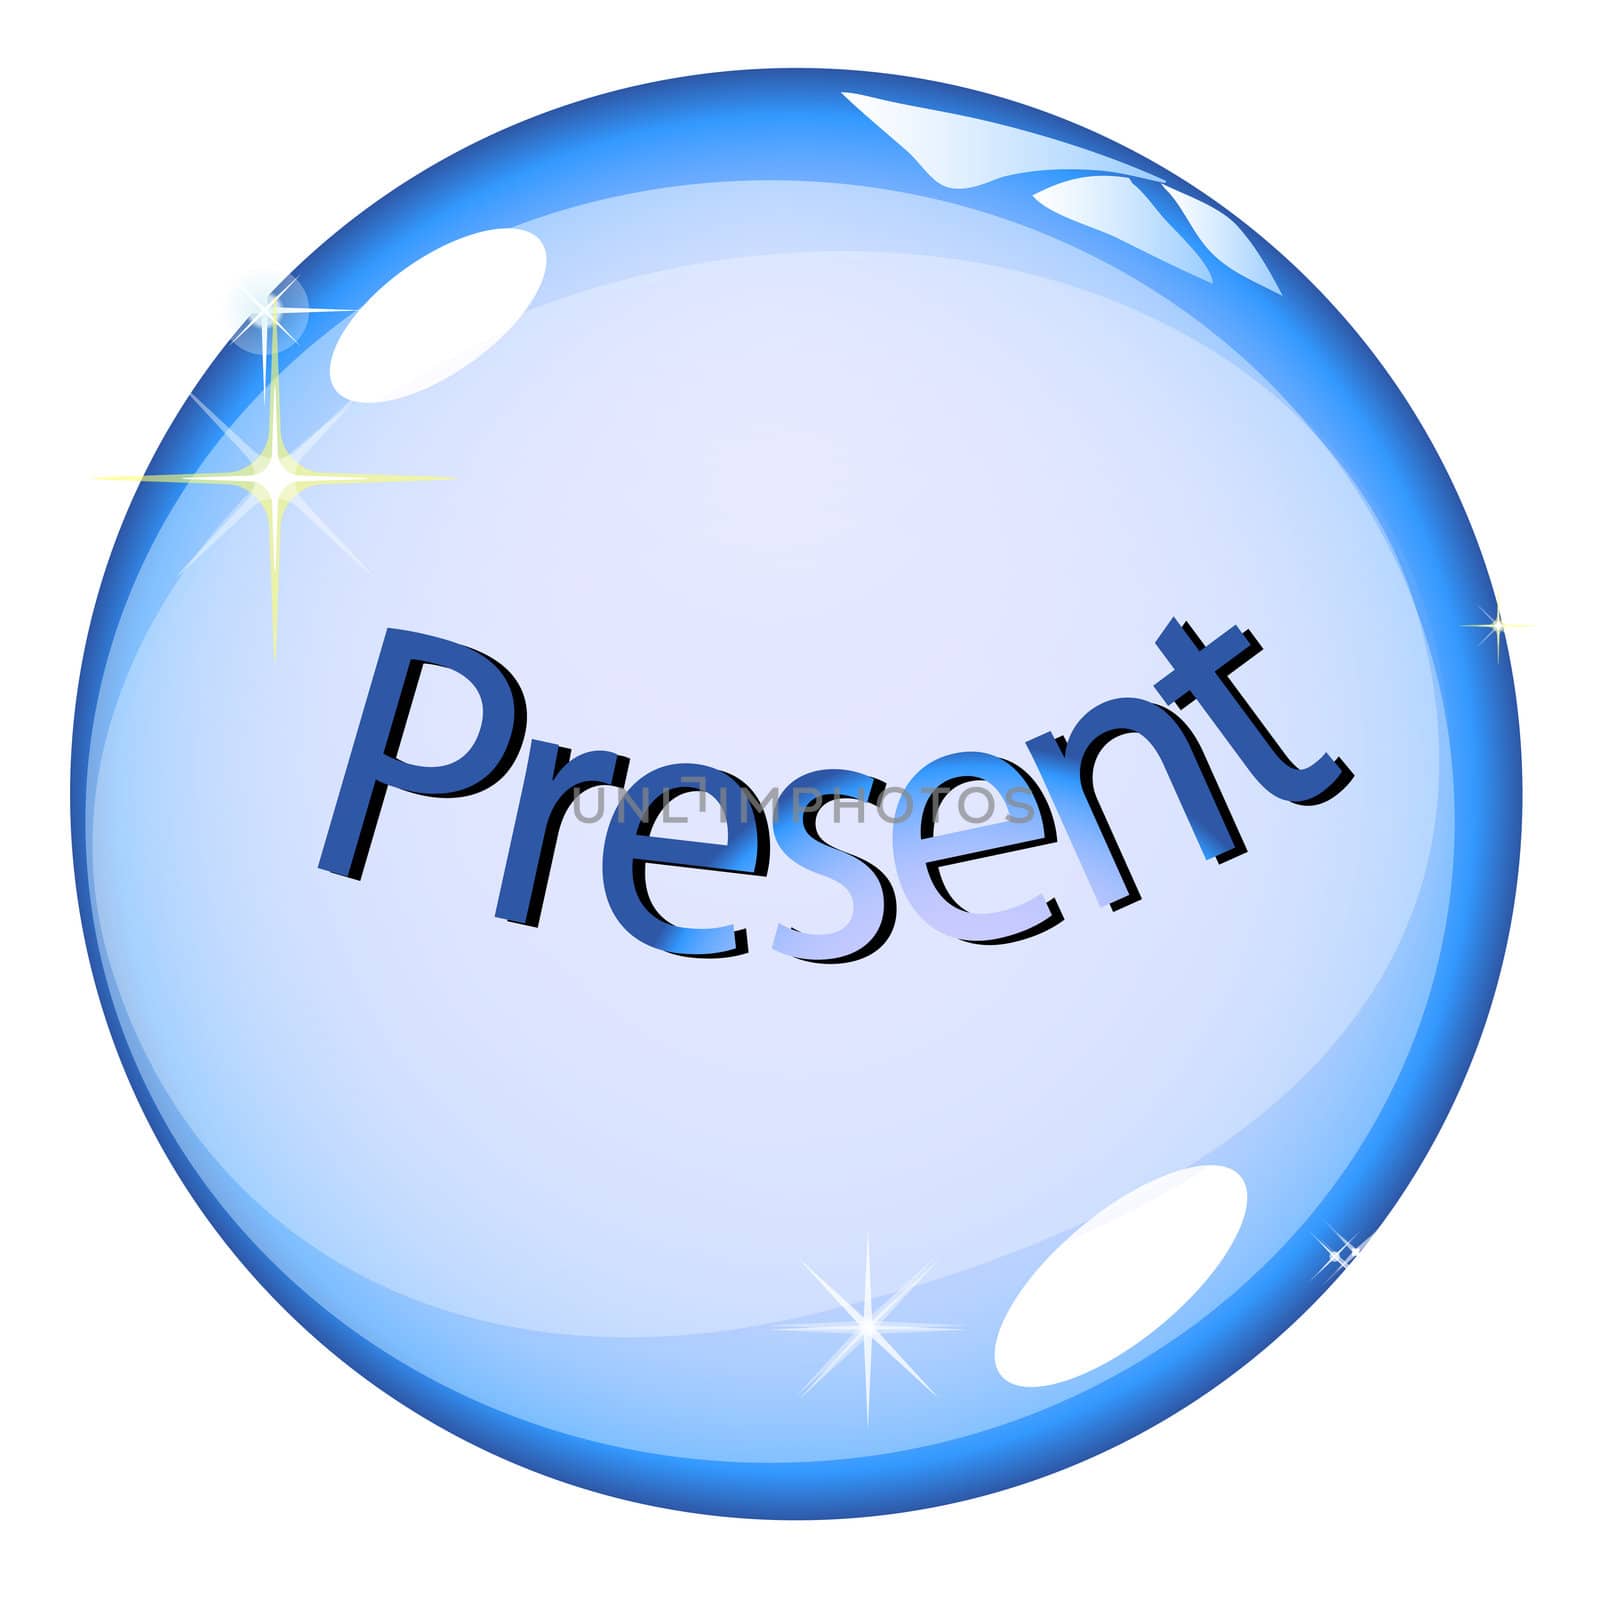 Crystal Ball Present by peromarketing